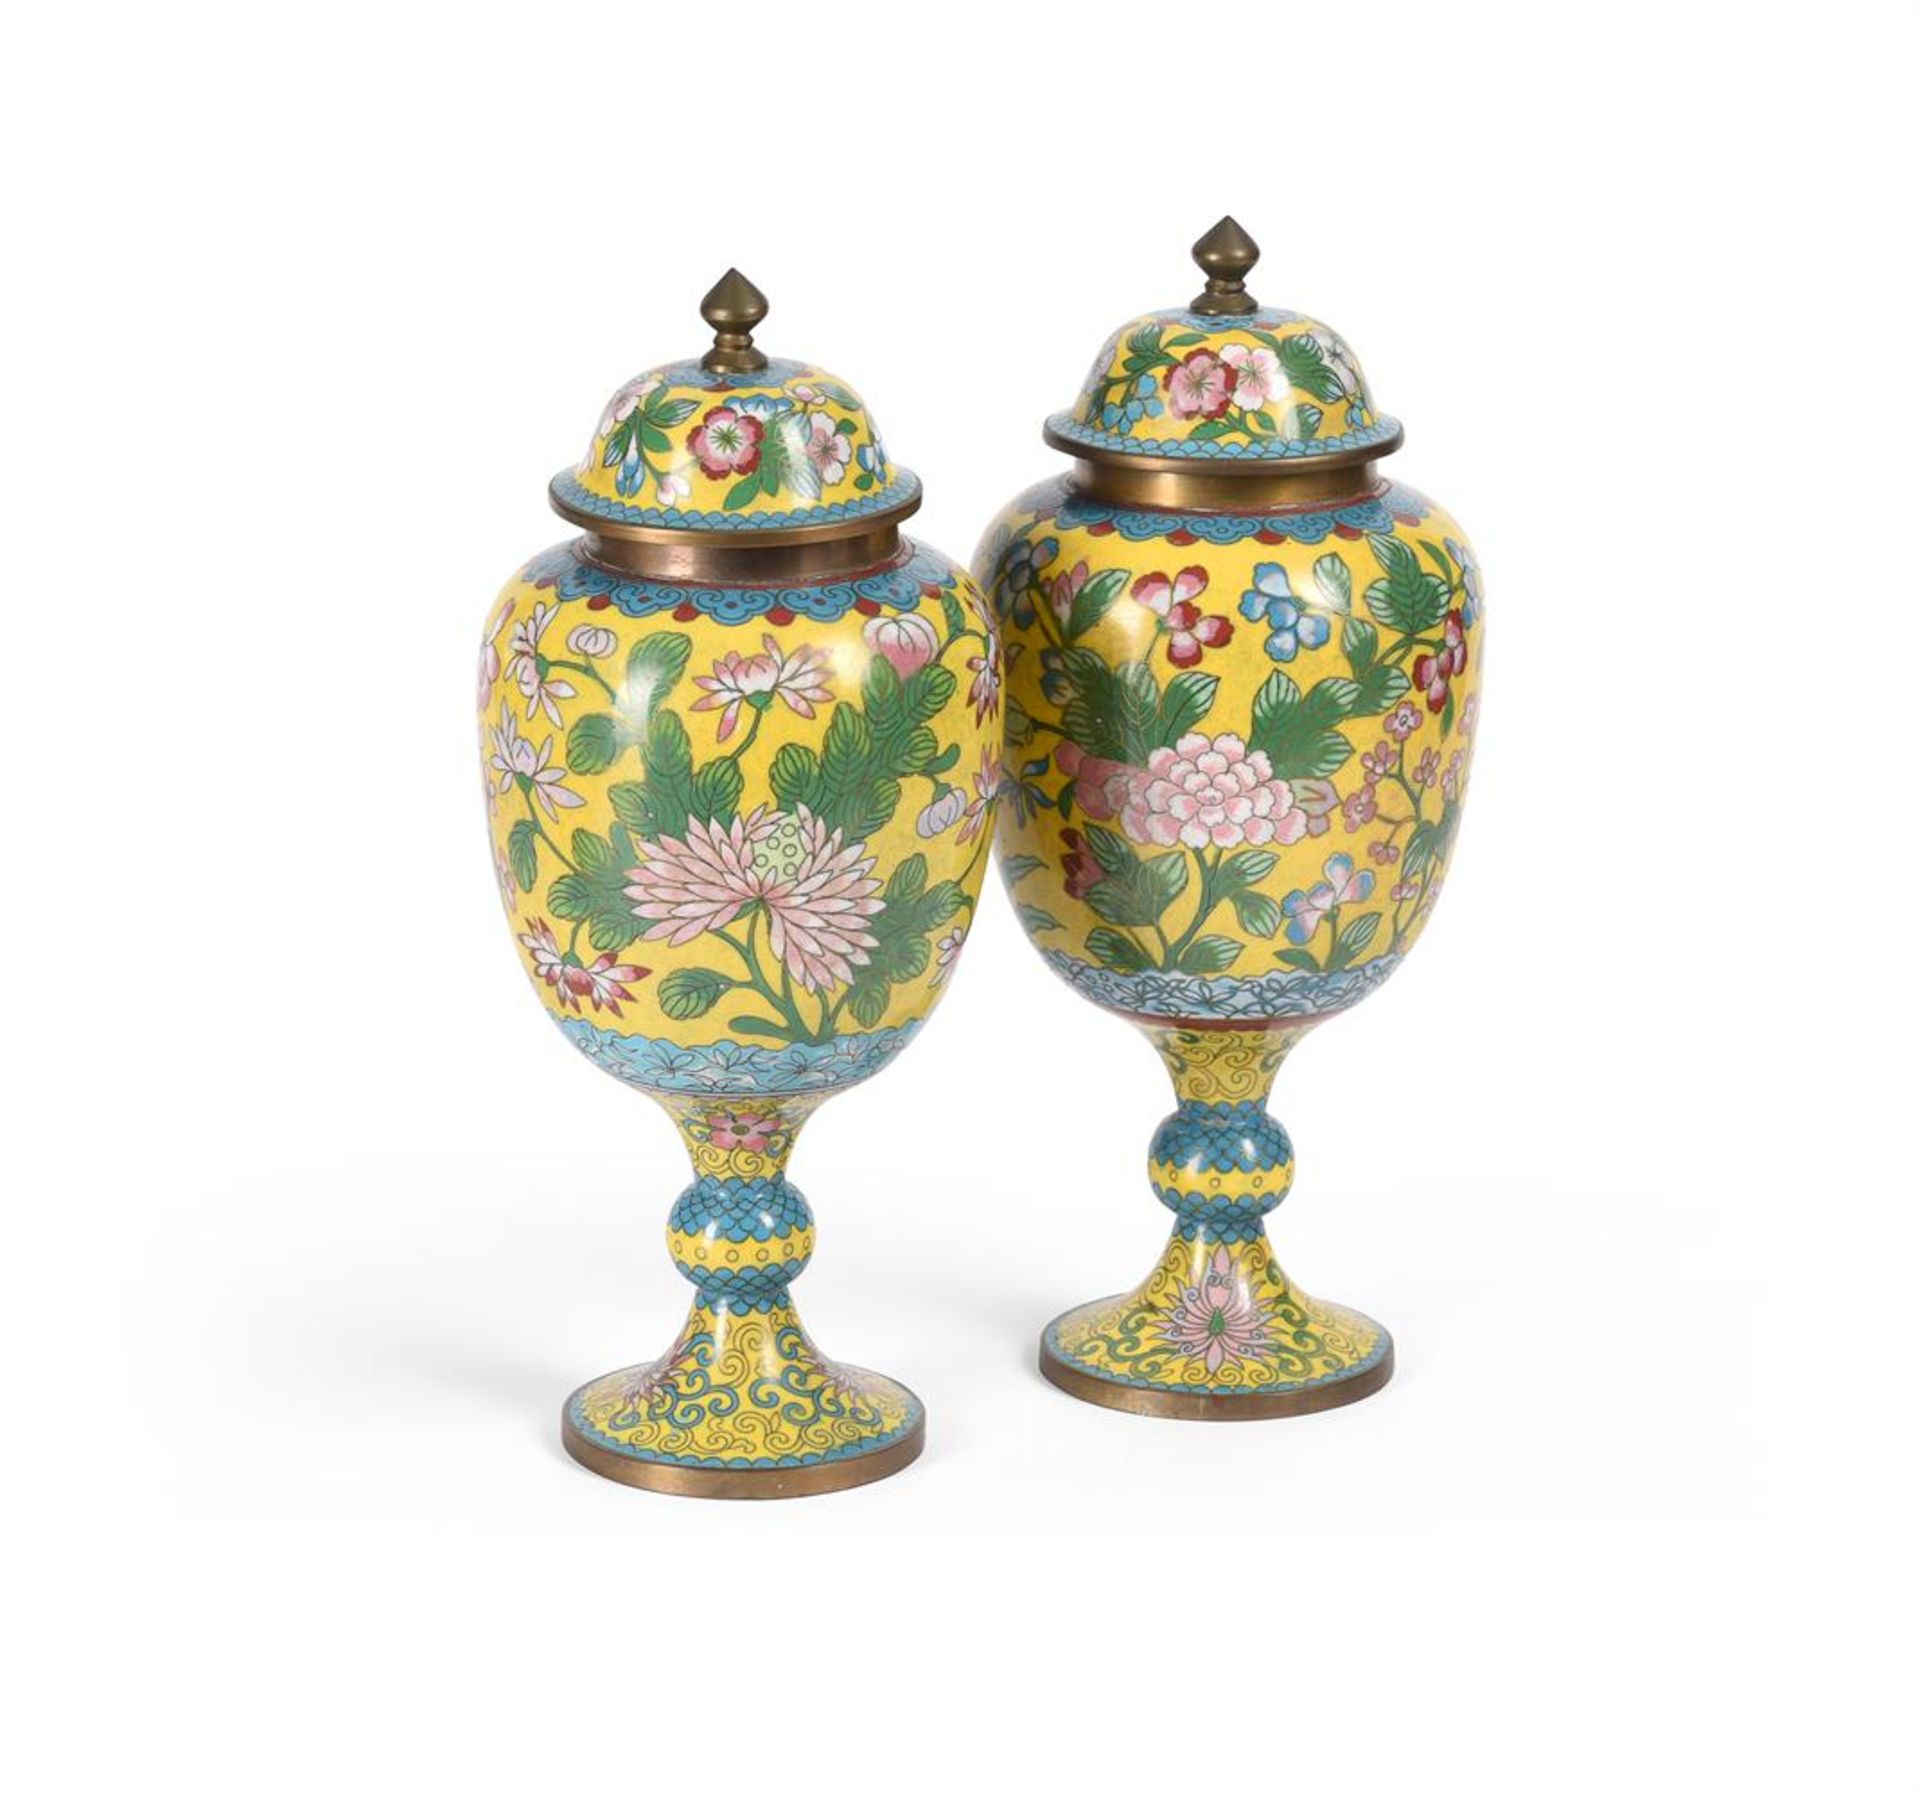 A PAIR OF CLOISONNE URNS AND COVERS